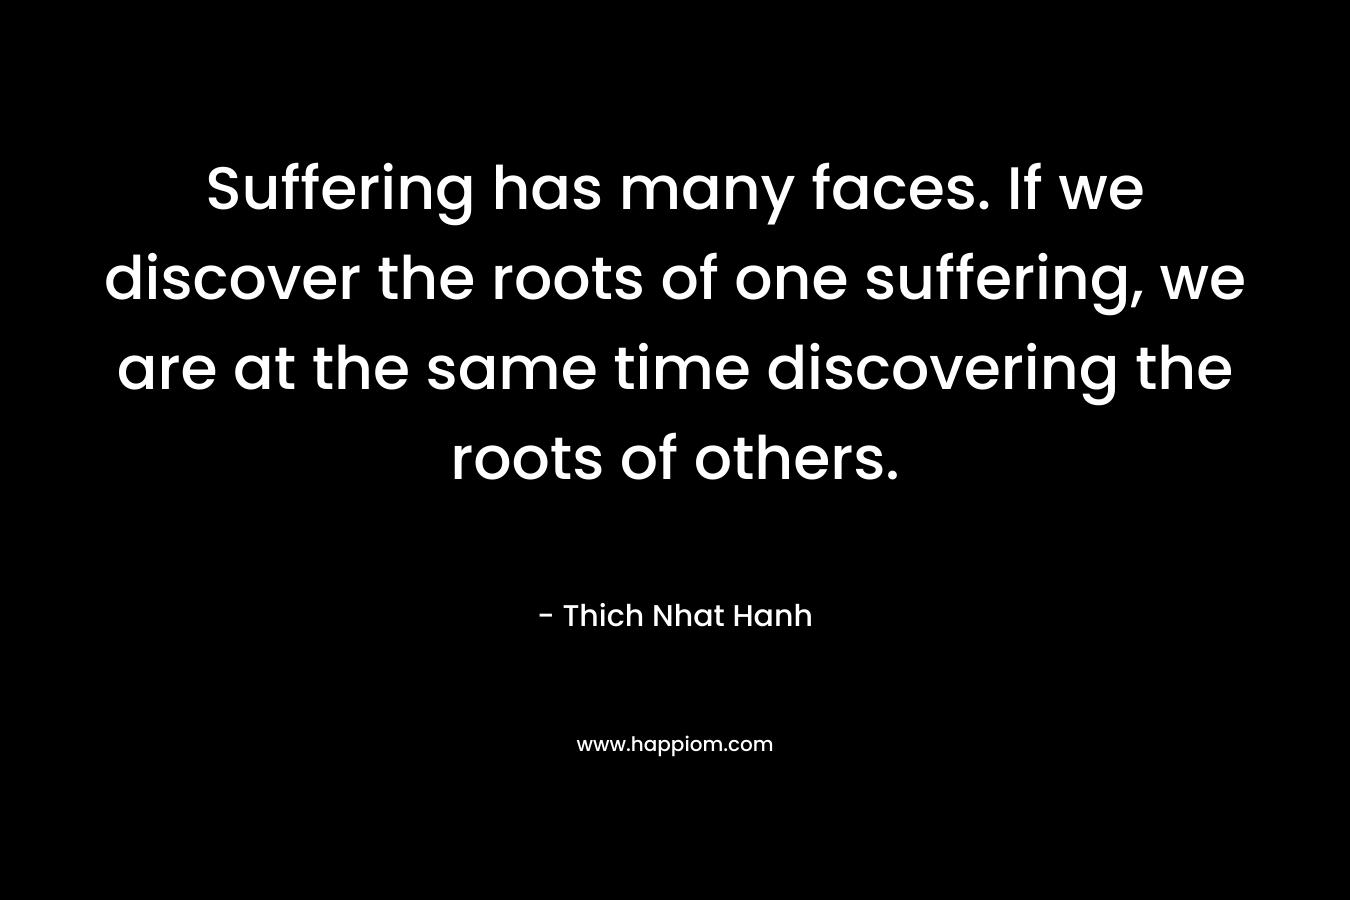 Suffering has many faces. If we discover the roots of one suffering, we are at the same time discovering the roots of others.